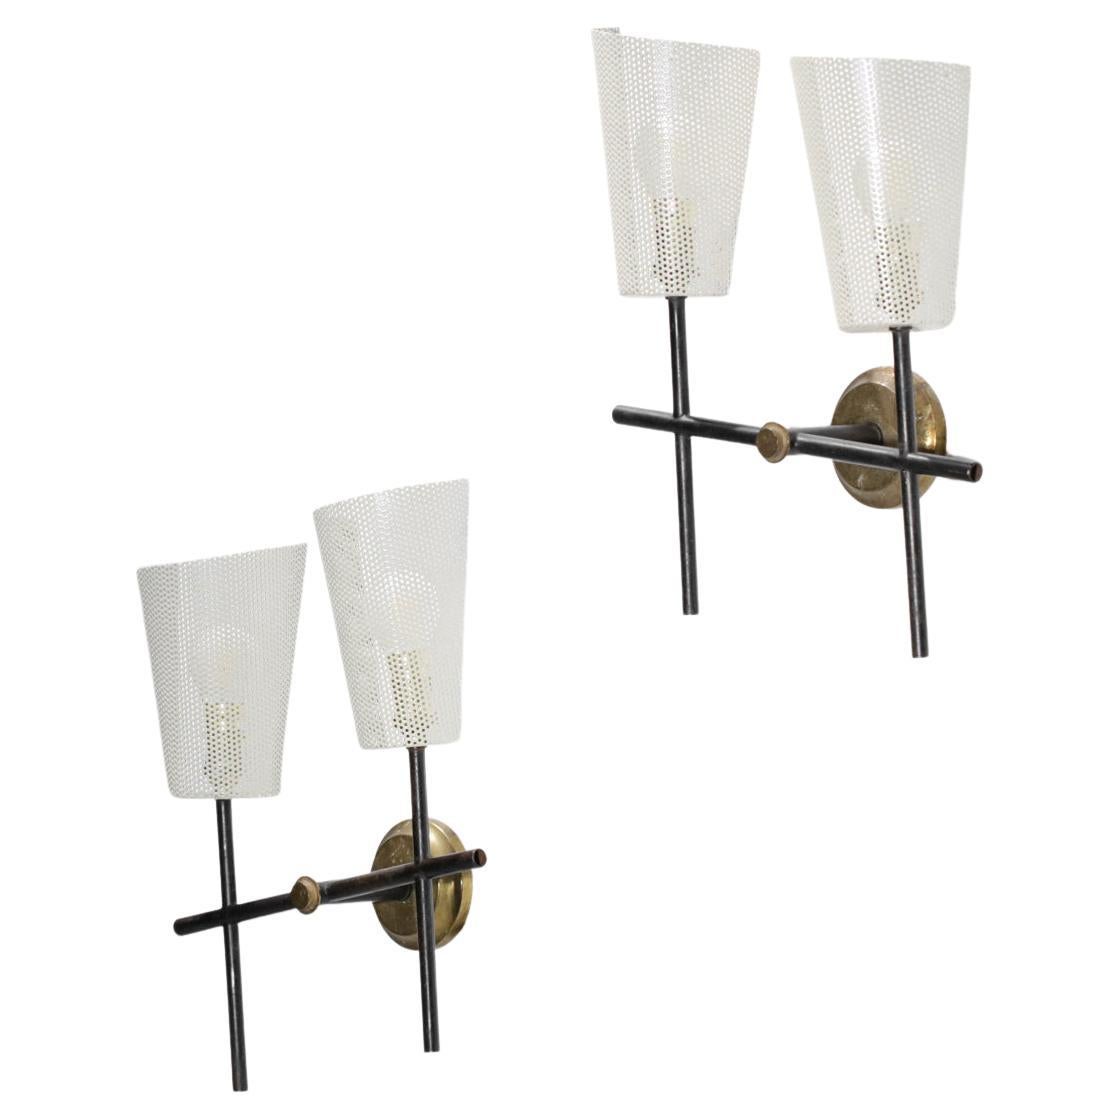 Pair of French sconces from the 50's in the style of Mathieu Matégot's work. Black lacquered metal structure and solid brass wall plate. Lampshade in perforated sheet metal or rigitulle repainted in beige. Nice vintage condition, please note the